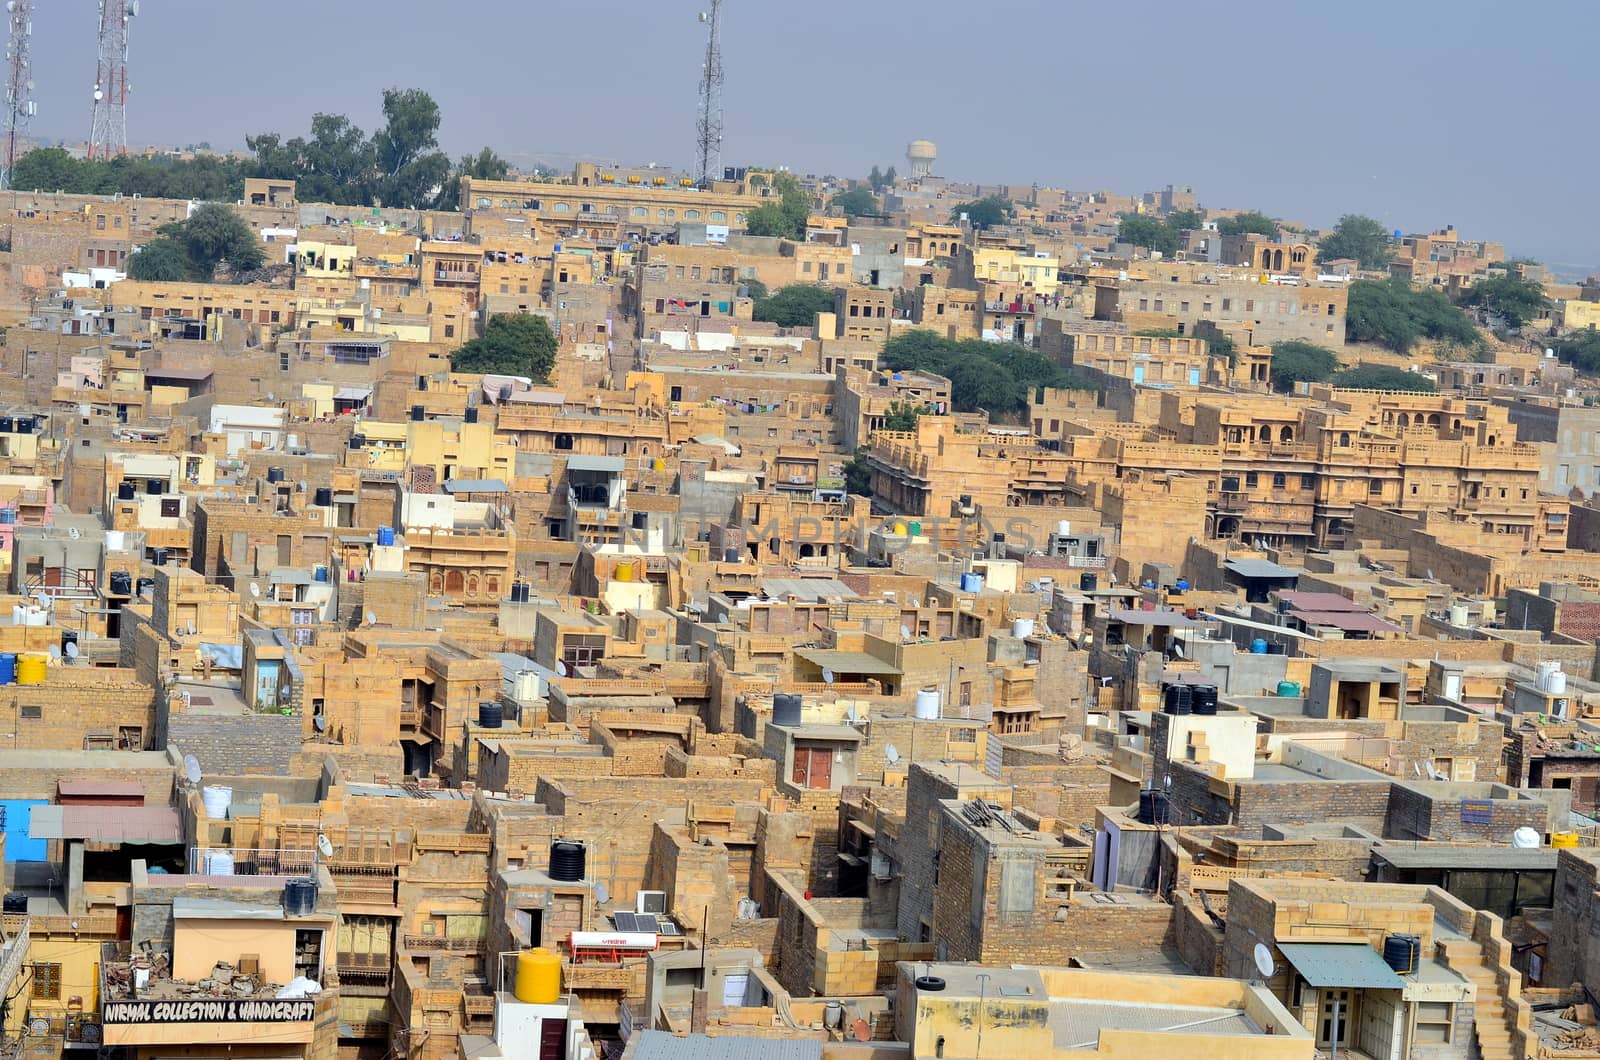 The golden city as seen from the Jaisalmer Fort. It is believed to be one of the very few "living forts" in the world, as nearly one fourth of the old city's population still resides within the fort by jayantbahel